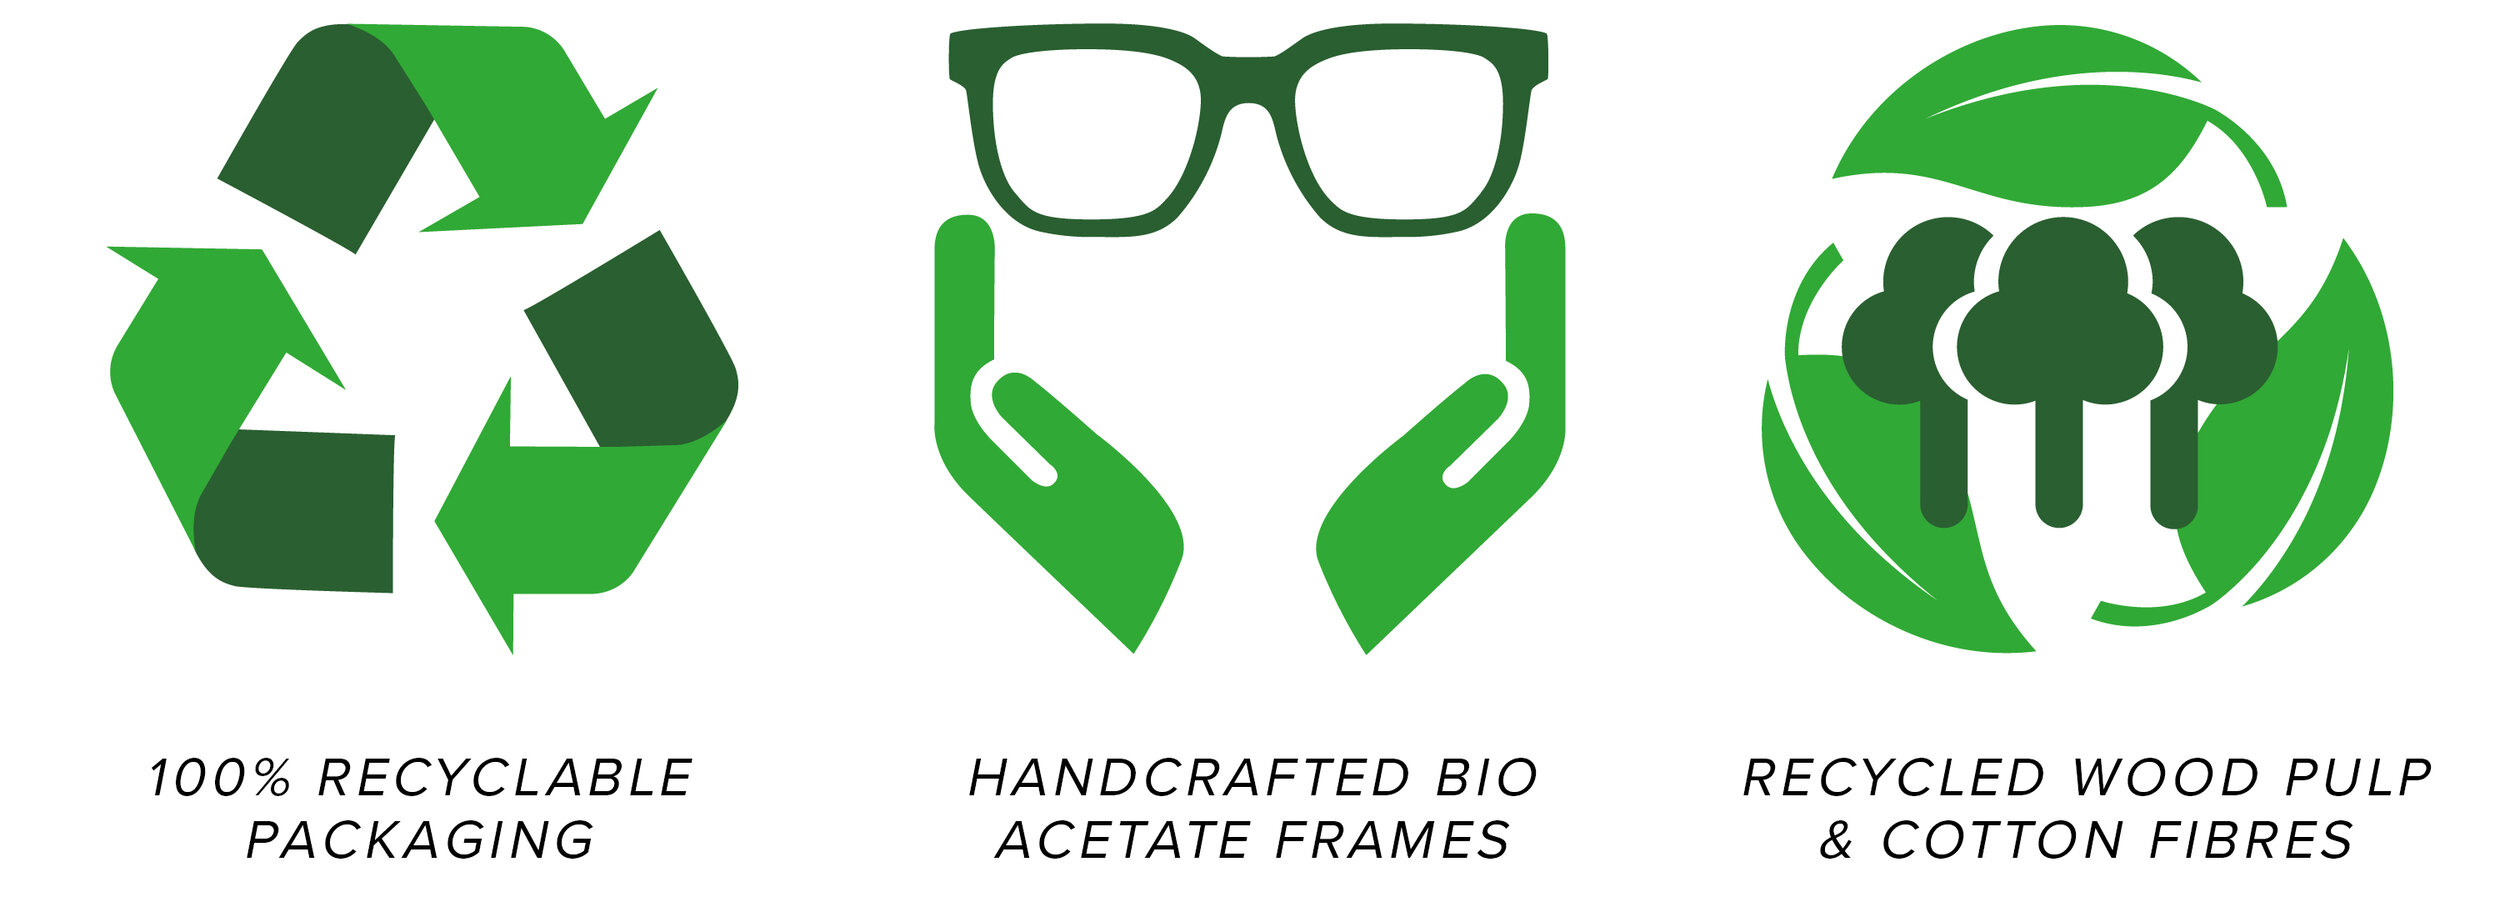 Recyclable packaging and Hand Crafted Frames